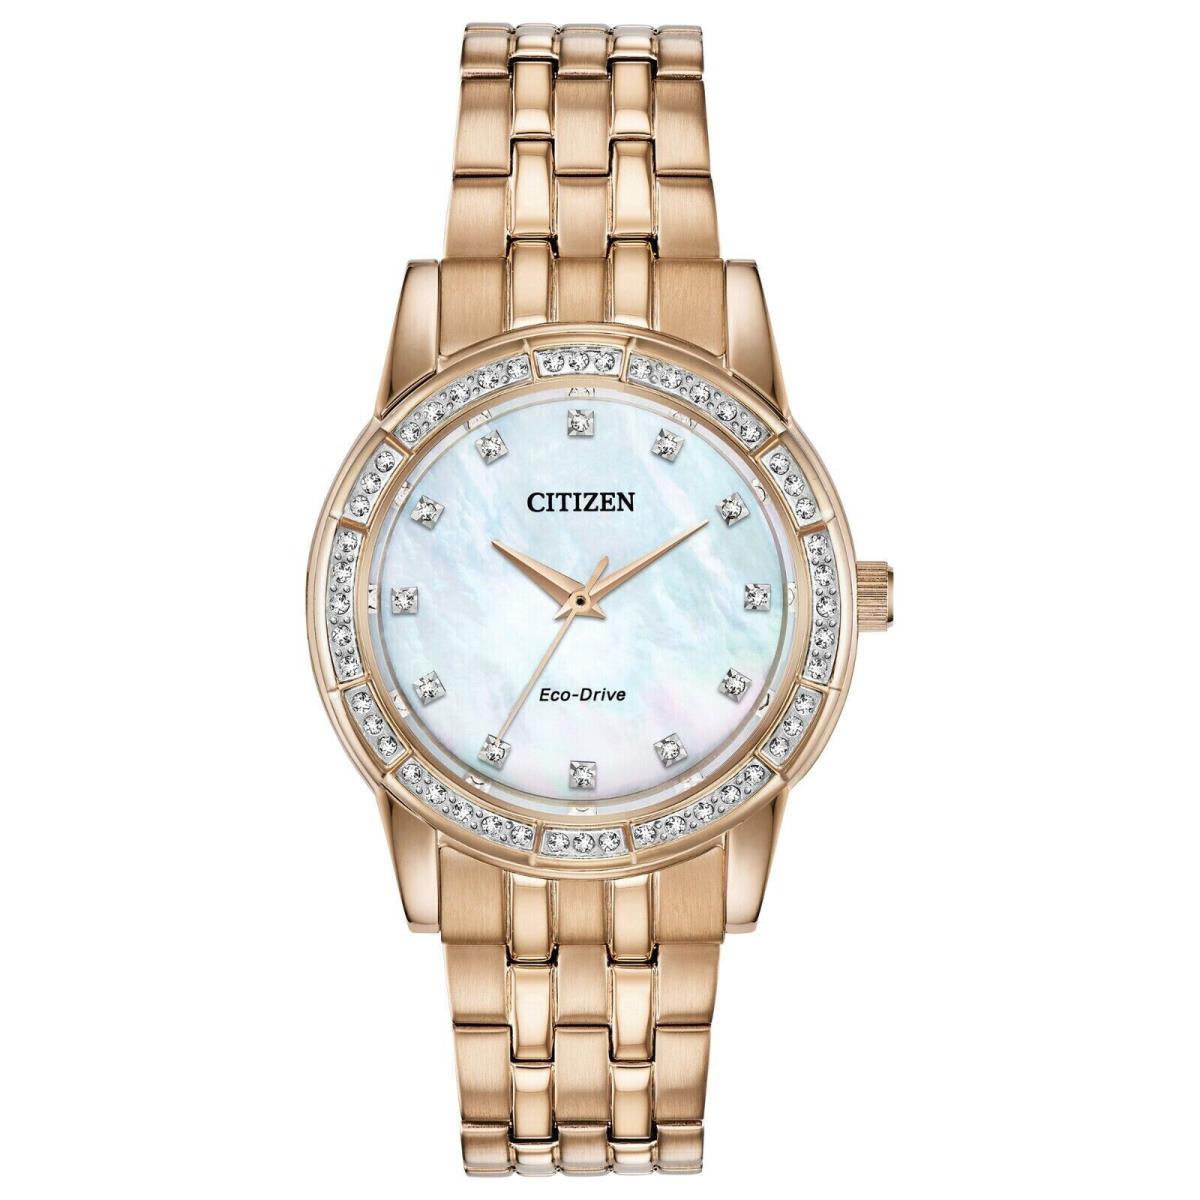 Citizen EM0773-54D Silhouette Crystal Mother-of-pearl Dial Eco-drive Watch - Dial: , Band: Rose Gold, Bezel: Rose Gold